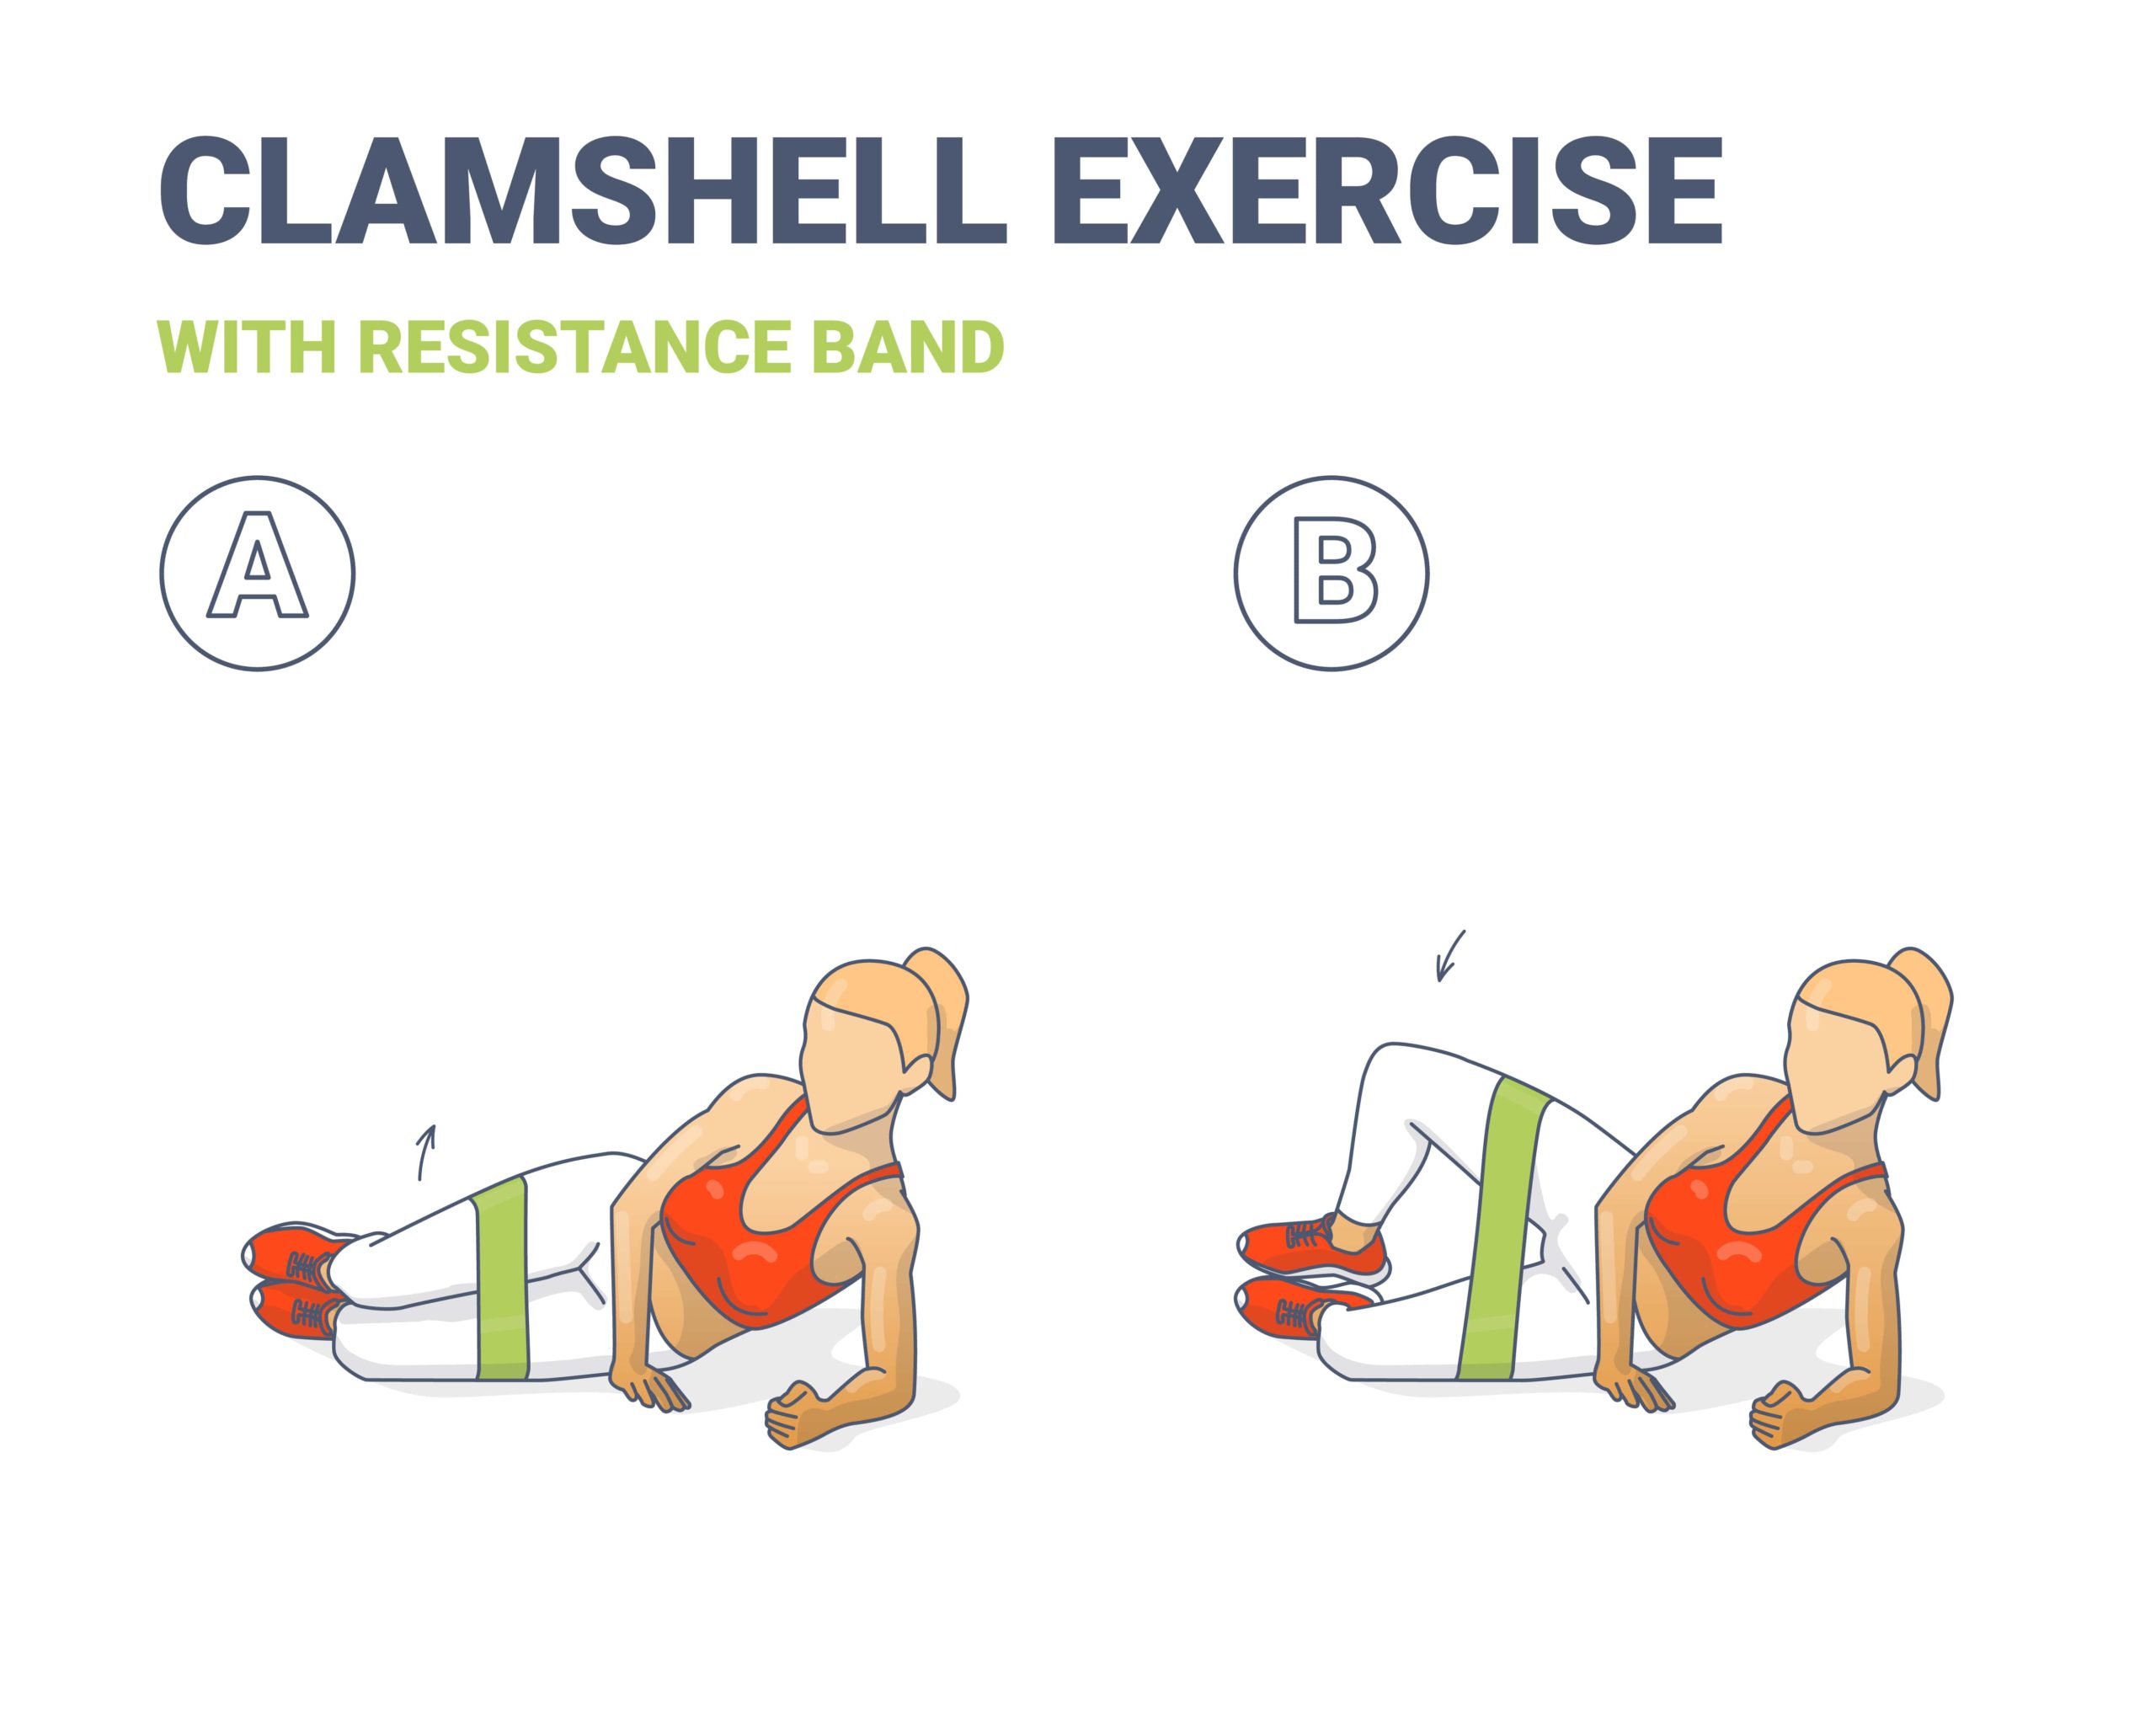 Exercice n° 2 : Clamshell